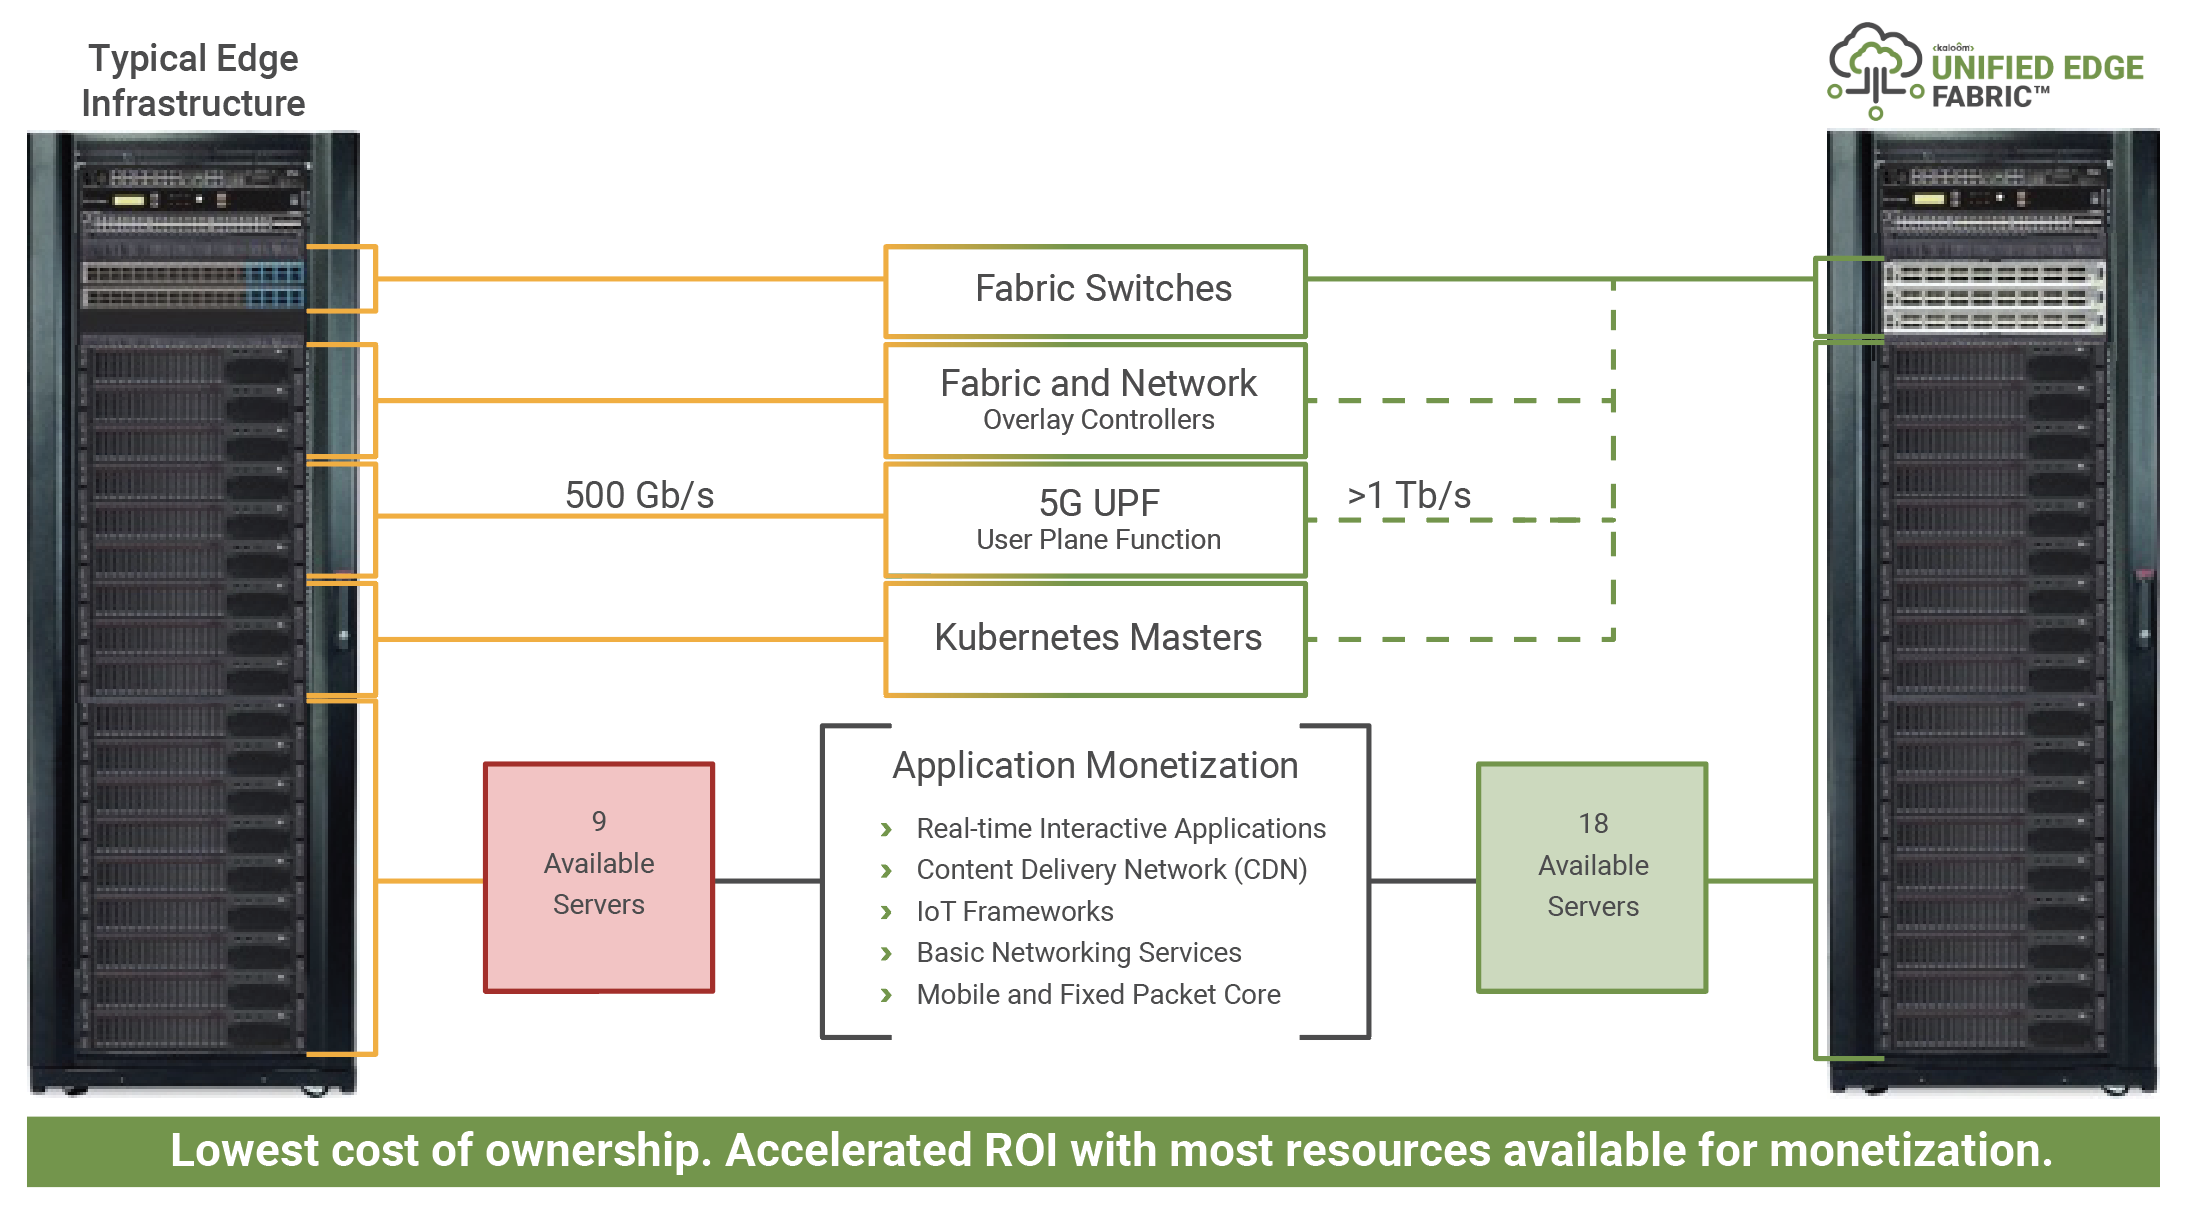 Typical Edge Infrastructure vs. Kaloom's Unified Edge Fabric